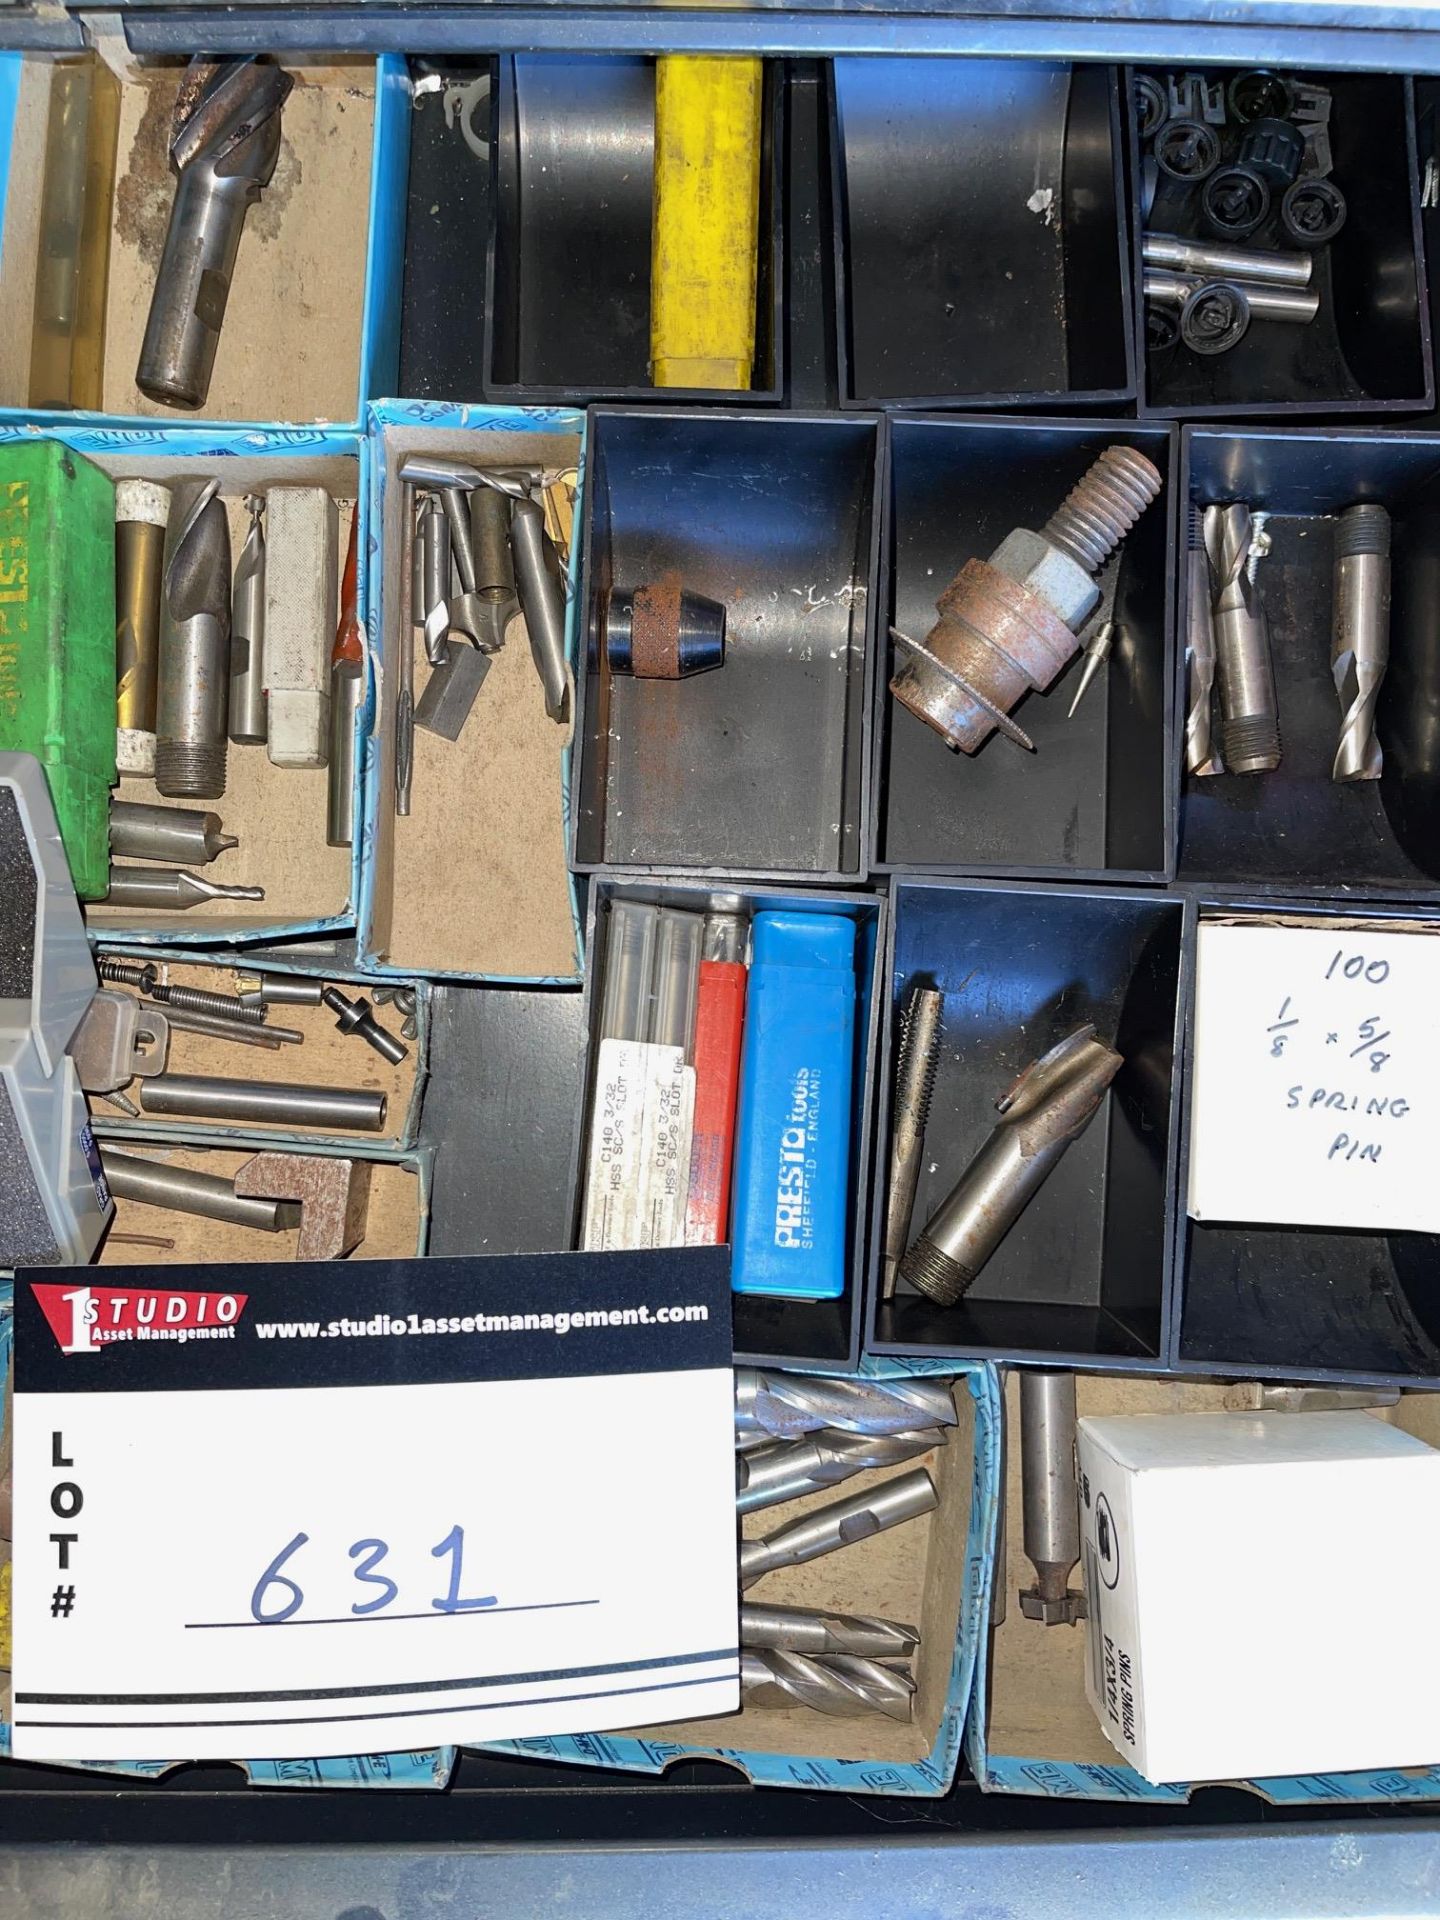 LOT/ MACHINING DRILL BITS, MEASURING DEVICES, DIAL TEST INDICATOR, CHUCKS ETC - Image 3 of 3